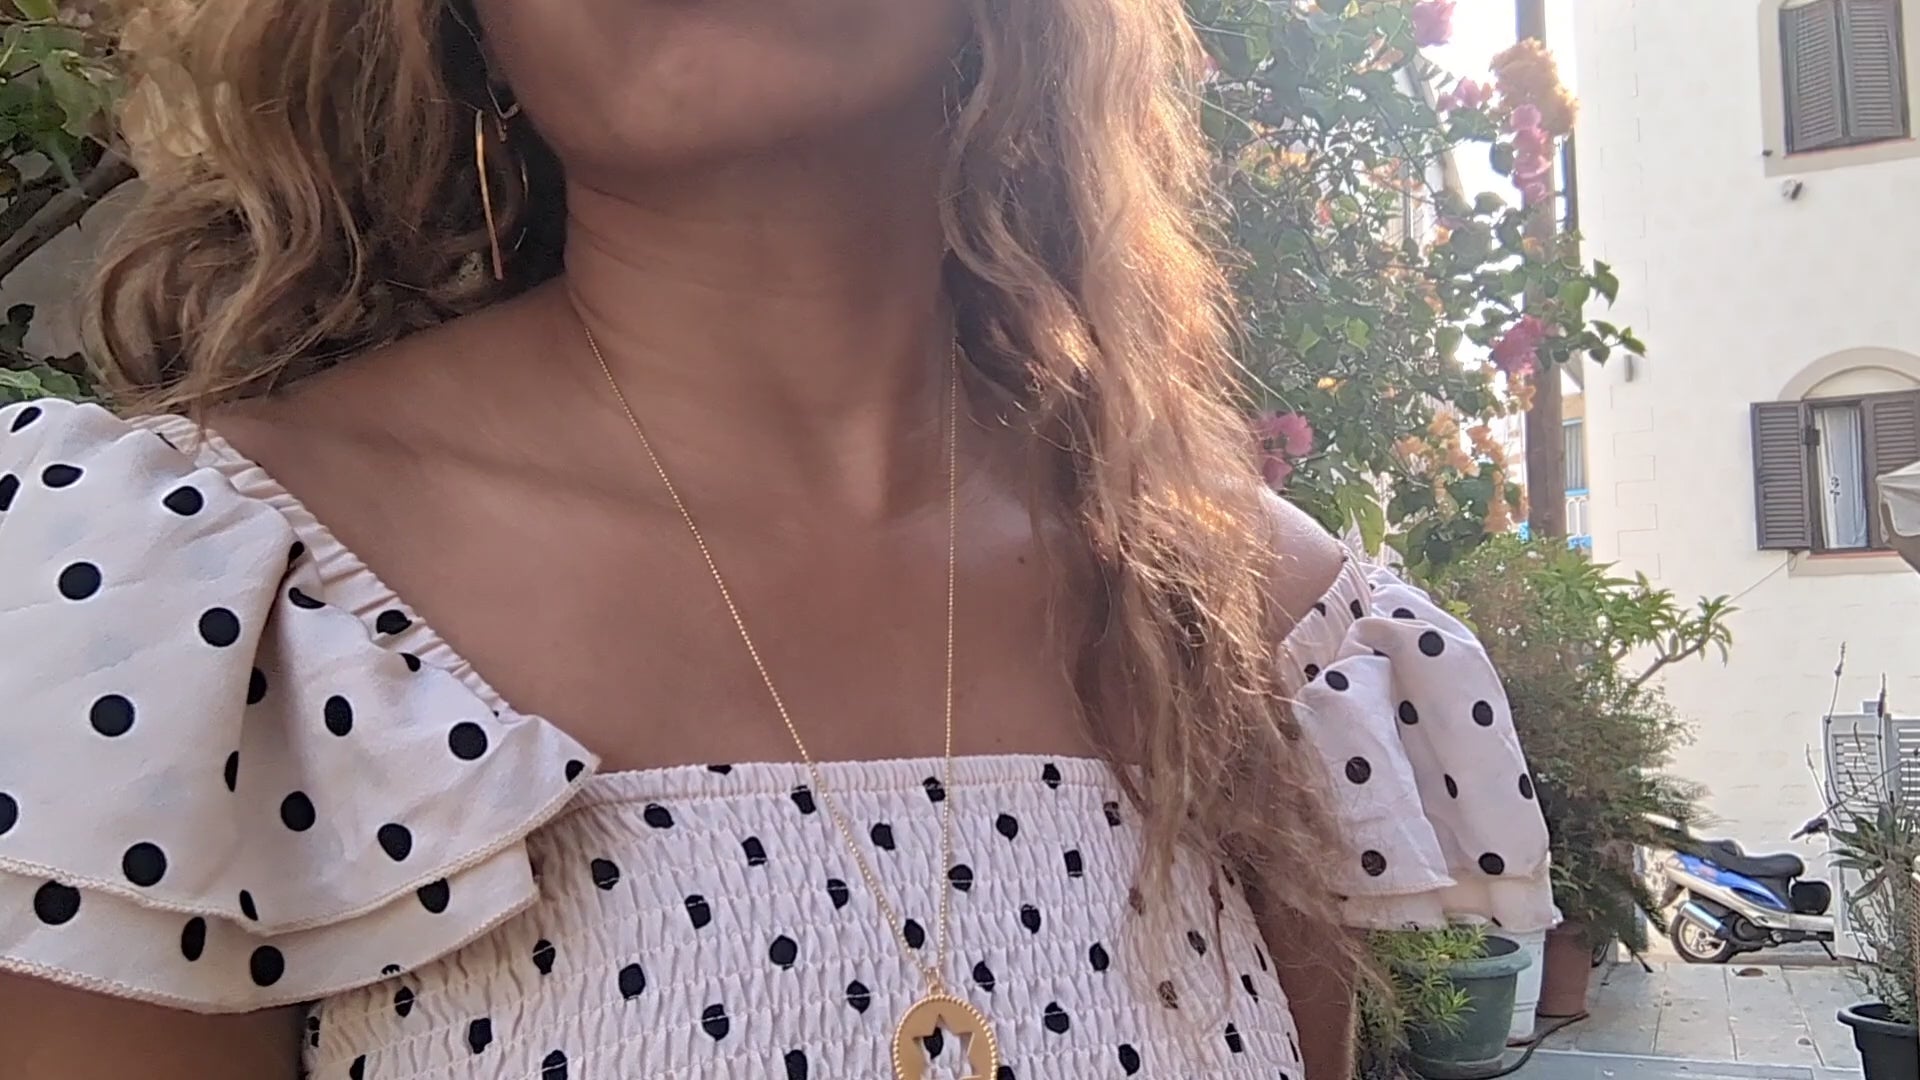 video of black woman wearing a polka dot dress on a European street and wearing the Rose gold star of David pendant necklace coin from the wandering jewel